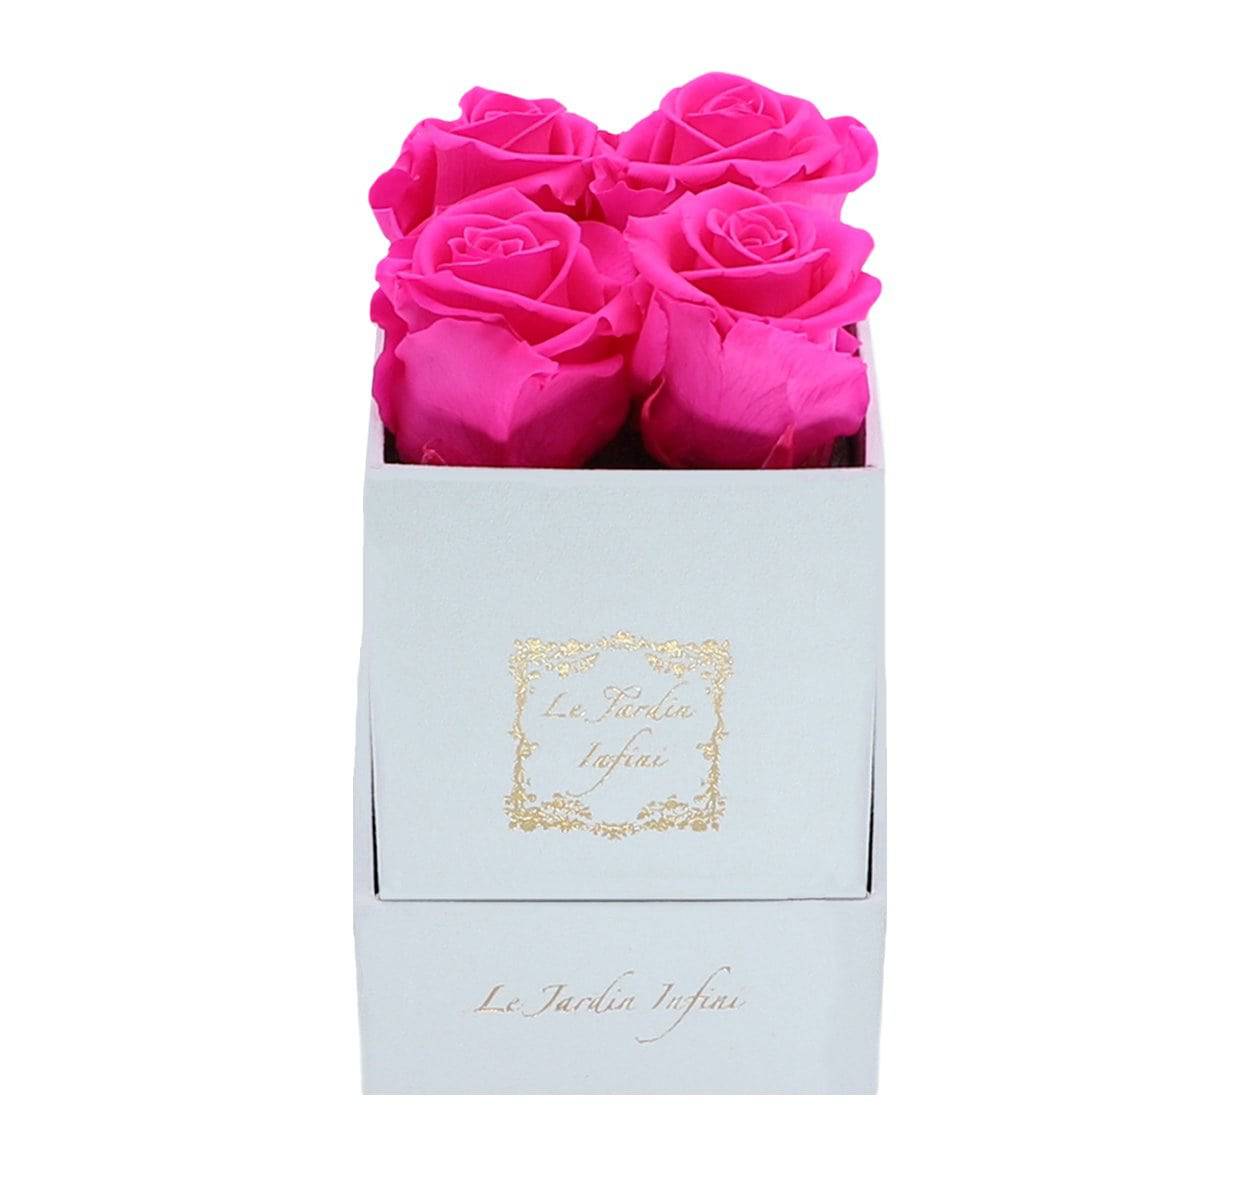 Hot Pink Roses in a box - Small Square White Box - Le Jardin Infini Roses in a Box